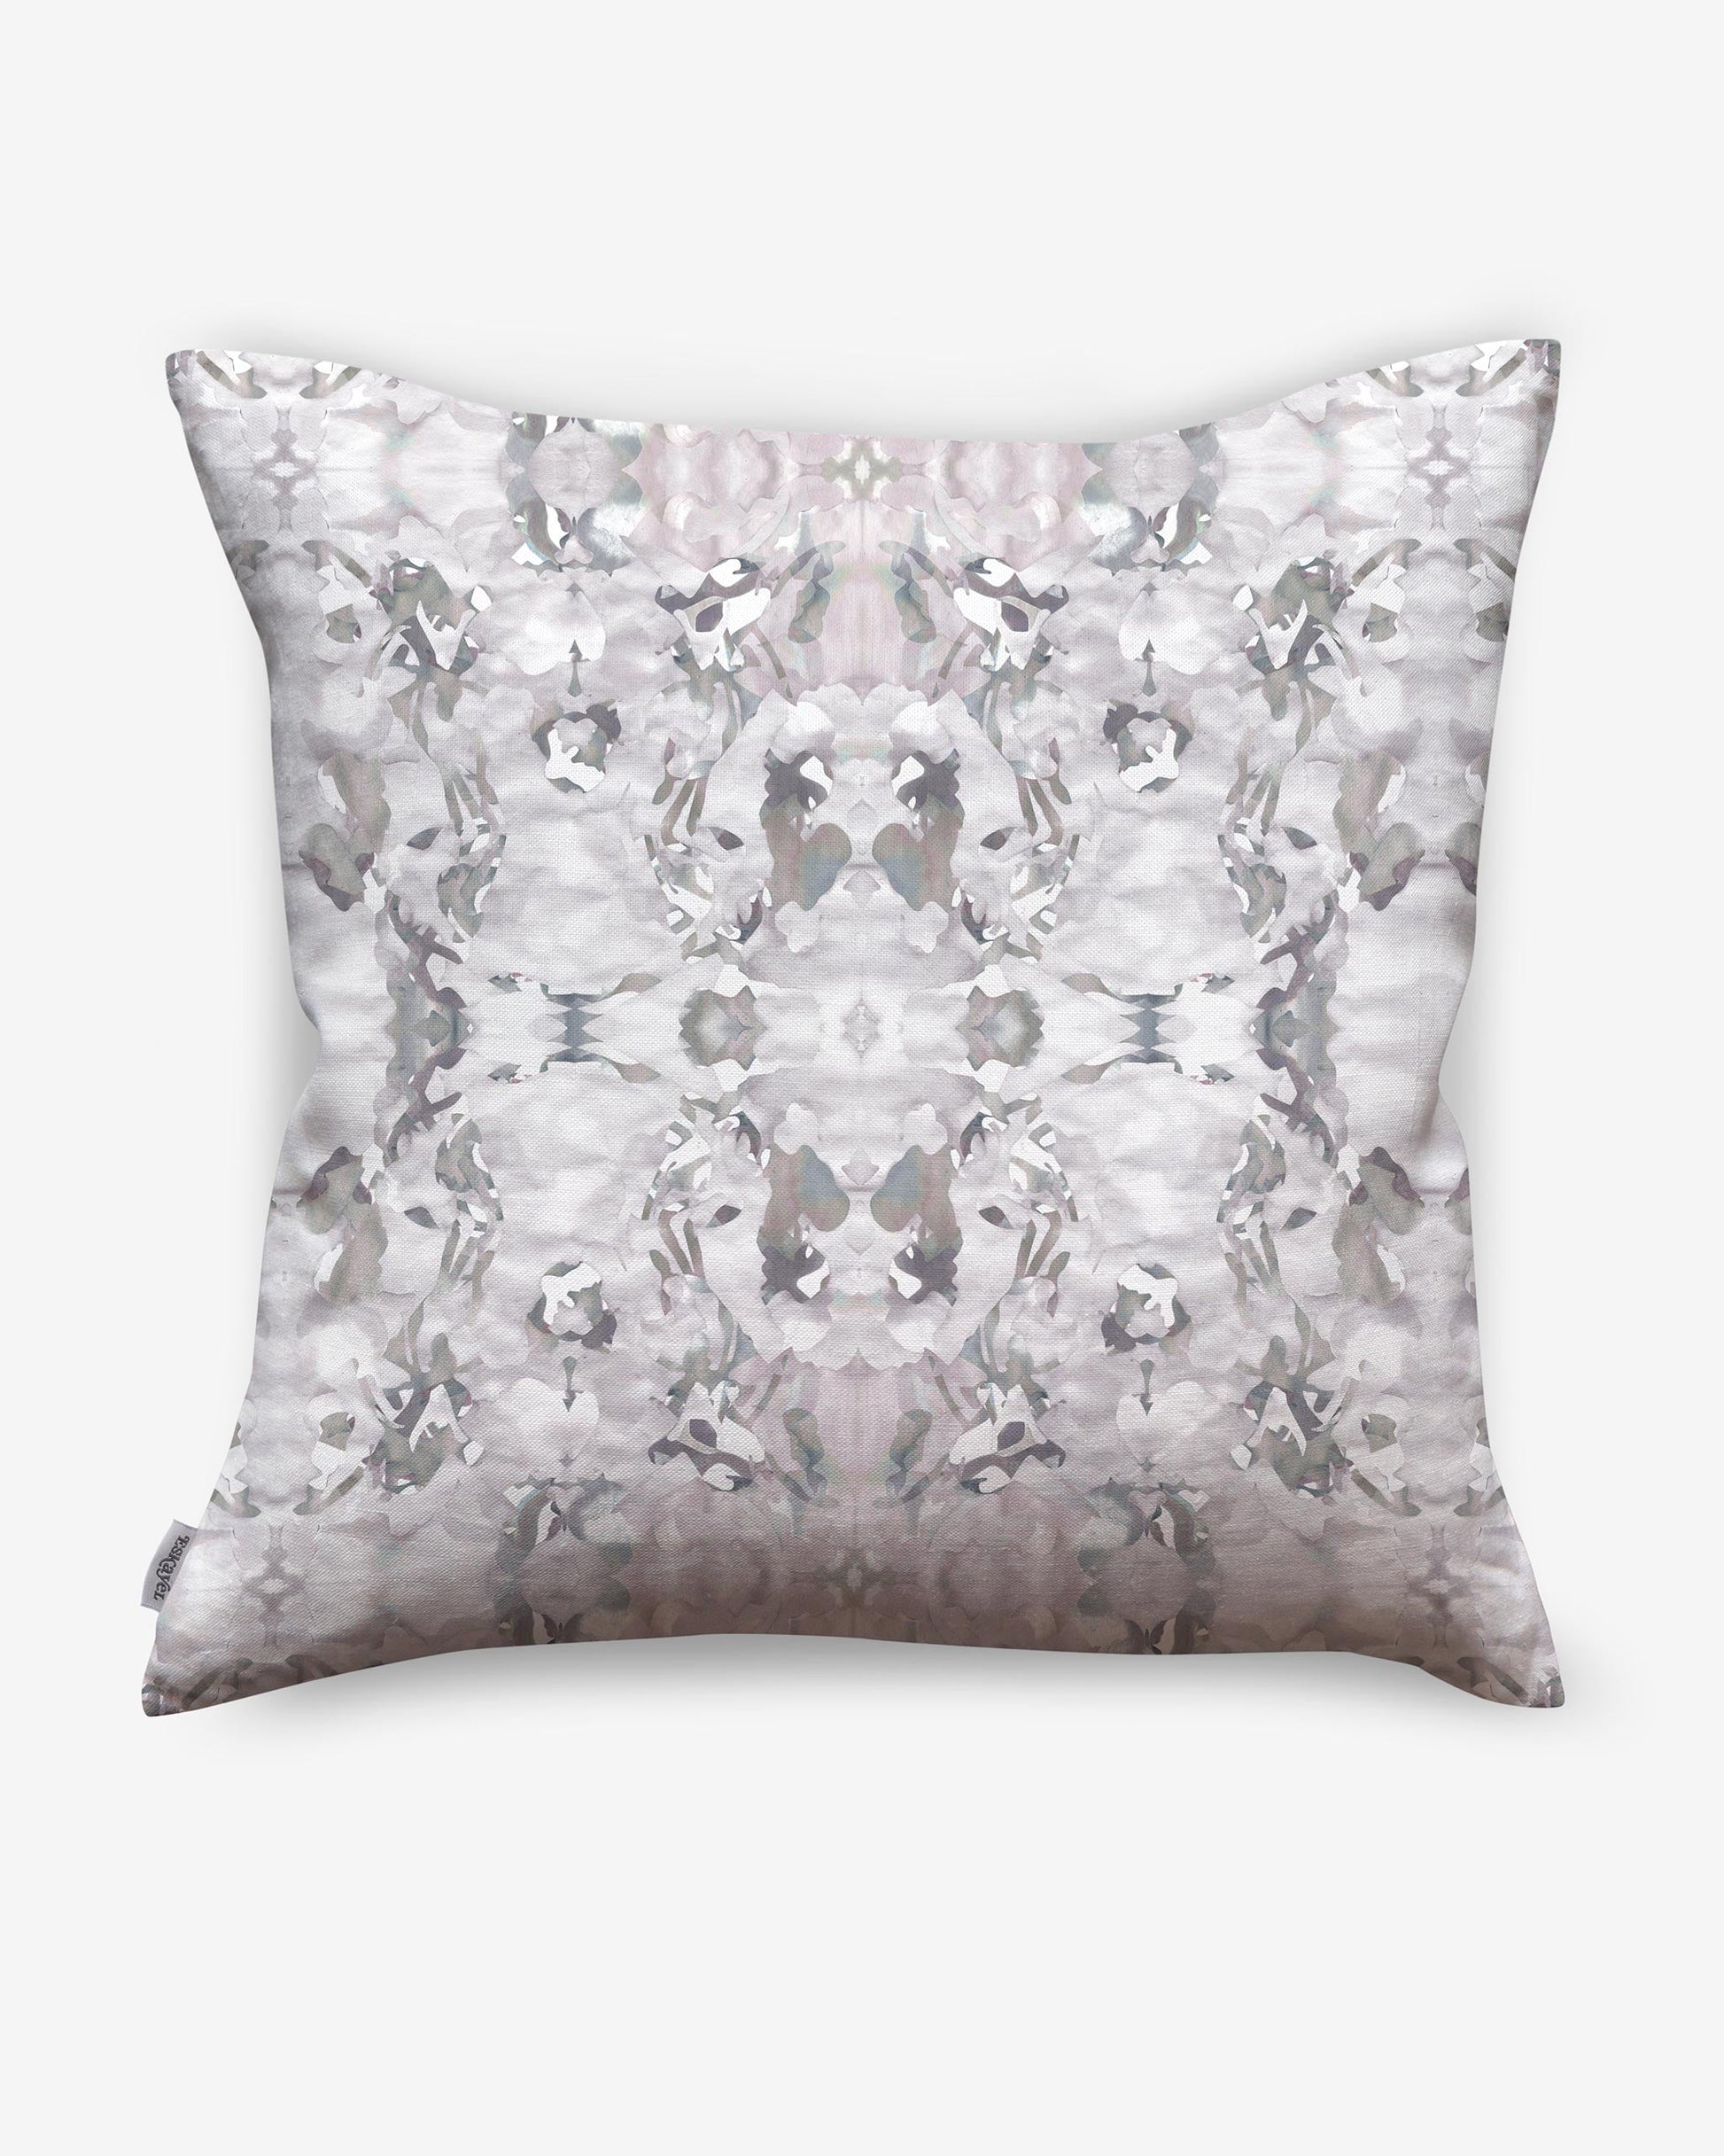 A Huerfano Pillow Ash with a high-end luxury fabric on it